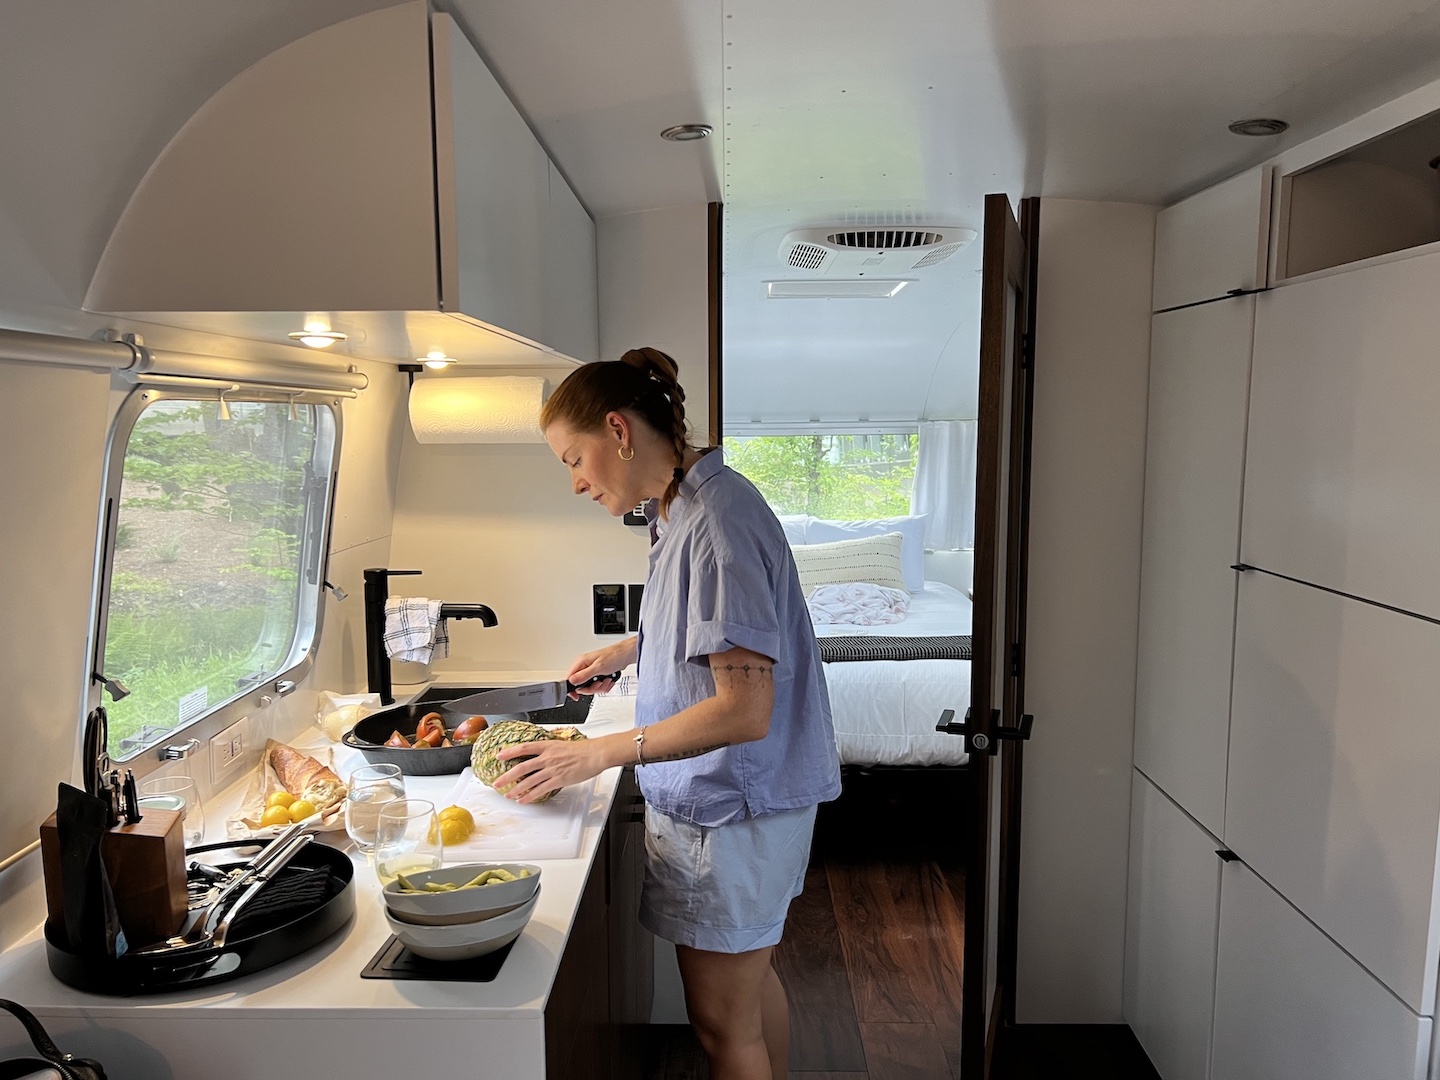 AutoCamp Catskills You haven't lived until you've cooked dinner in a fully outfitted trailer